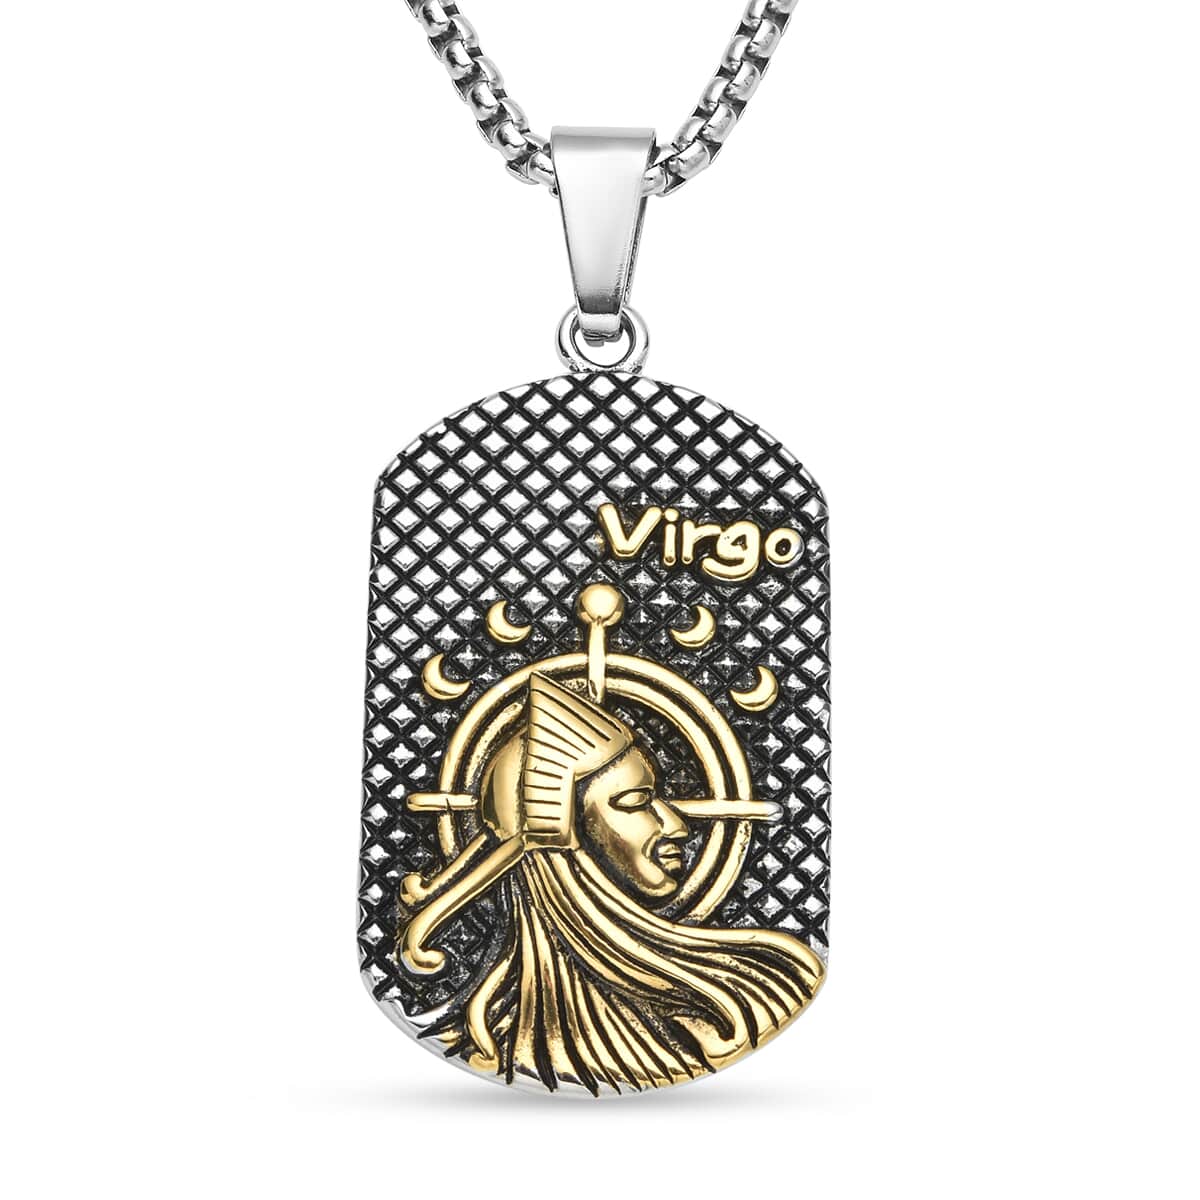 Virgo Dog Tag Jewelry Gift Box Pendant Necklace 23.5 Inches in ION Plated YG and Black Oxidized Stainless Steel image number 1